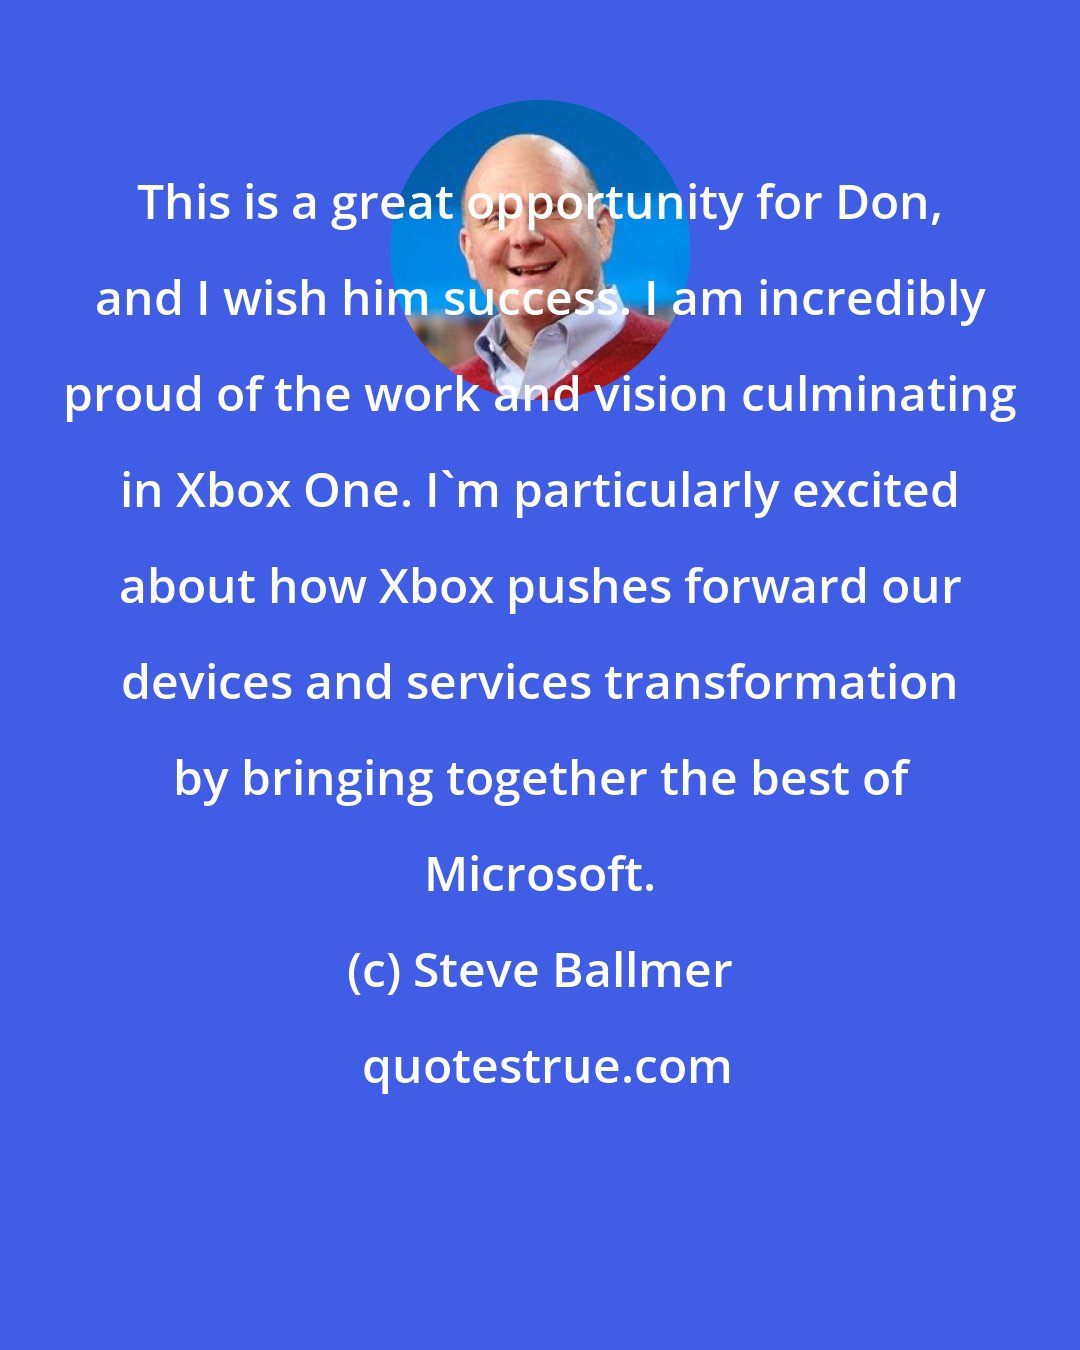 Steve Ballmer: This is a great opportunity for Don, and I wish him success. I am incredibly proud of the work and vision culminating in Xbox One. I'm particularly excited about how Xbox pushes forward our devices and services transformation by bringing together the best of Microsoft.